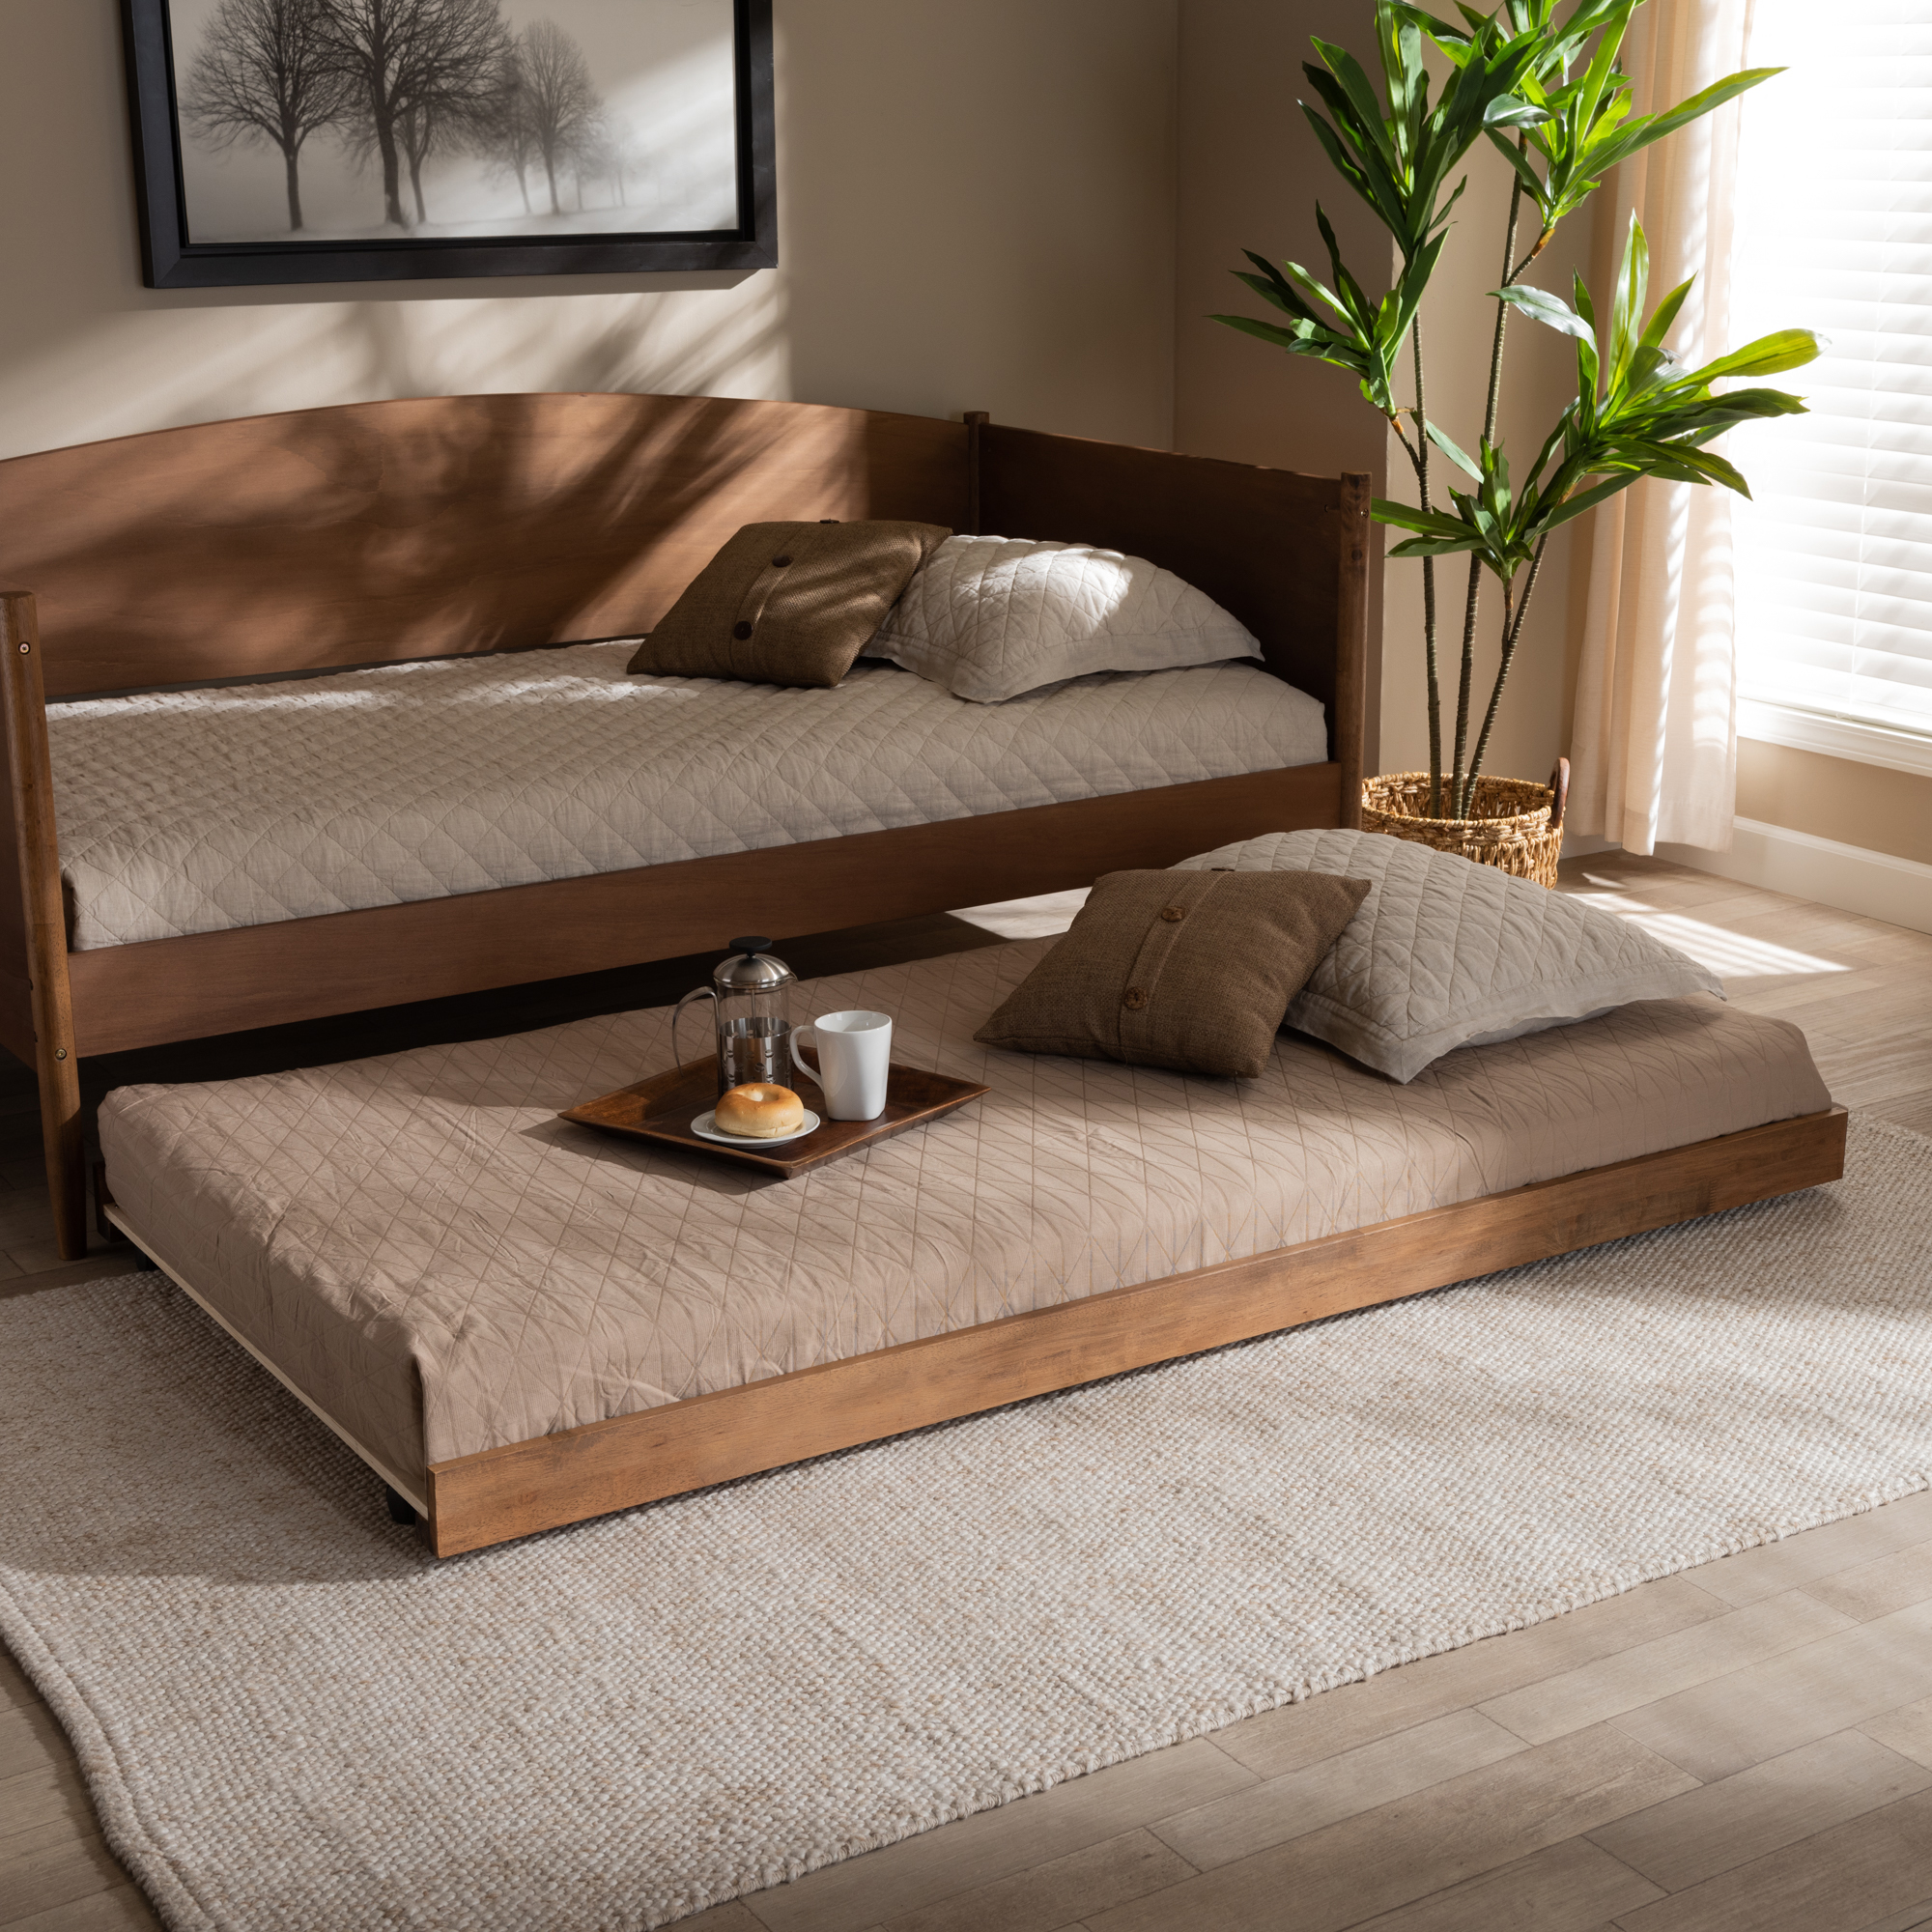  Modern Trundle Bed for Small Space